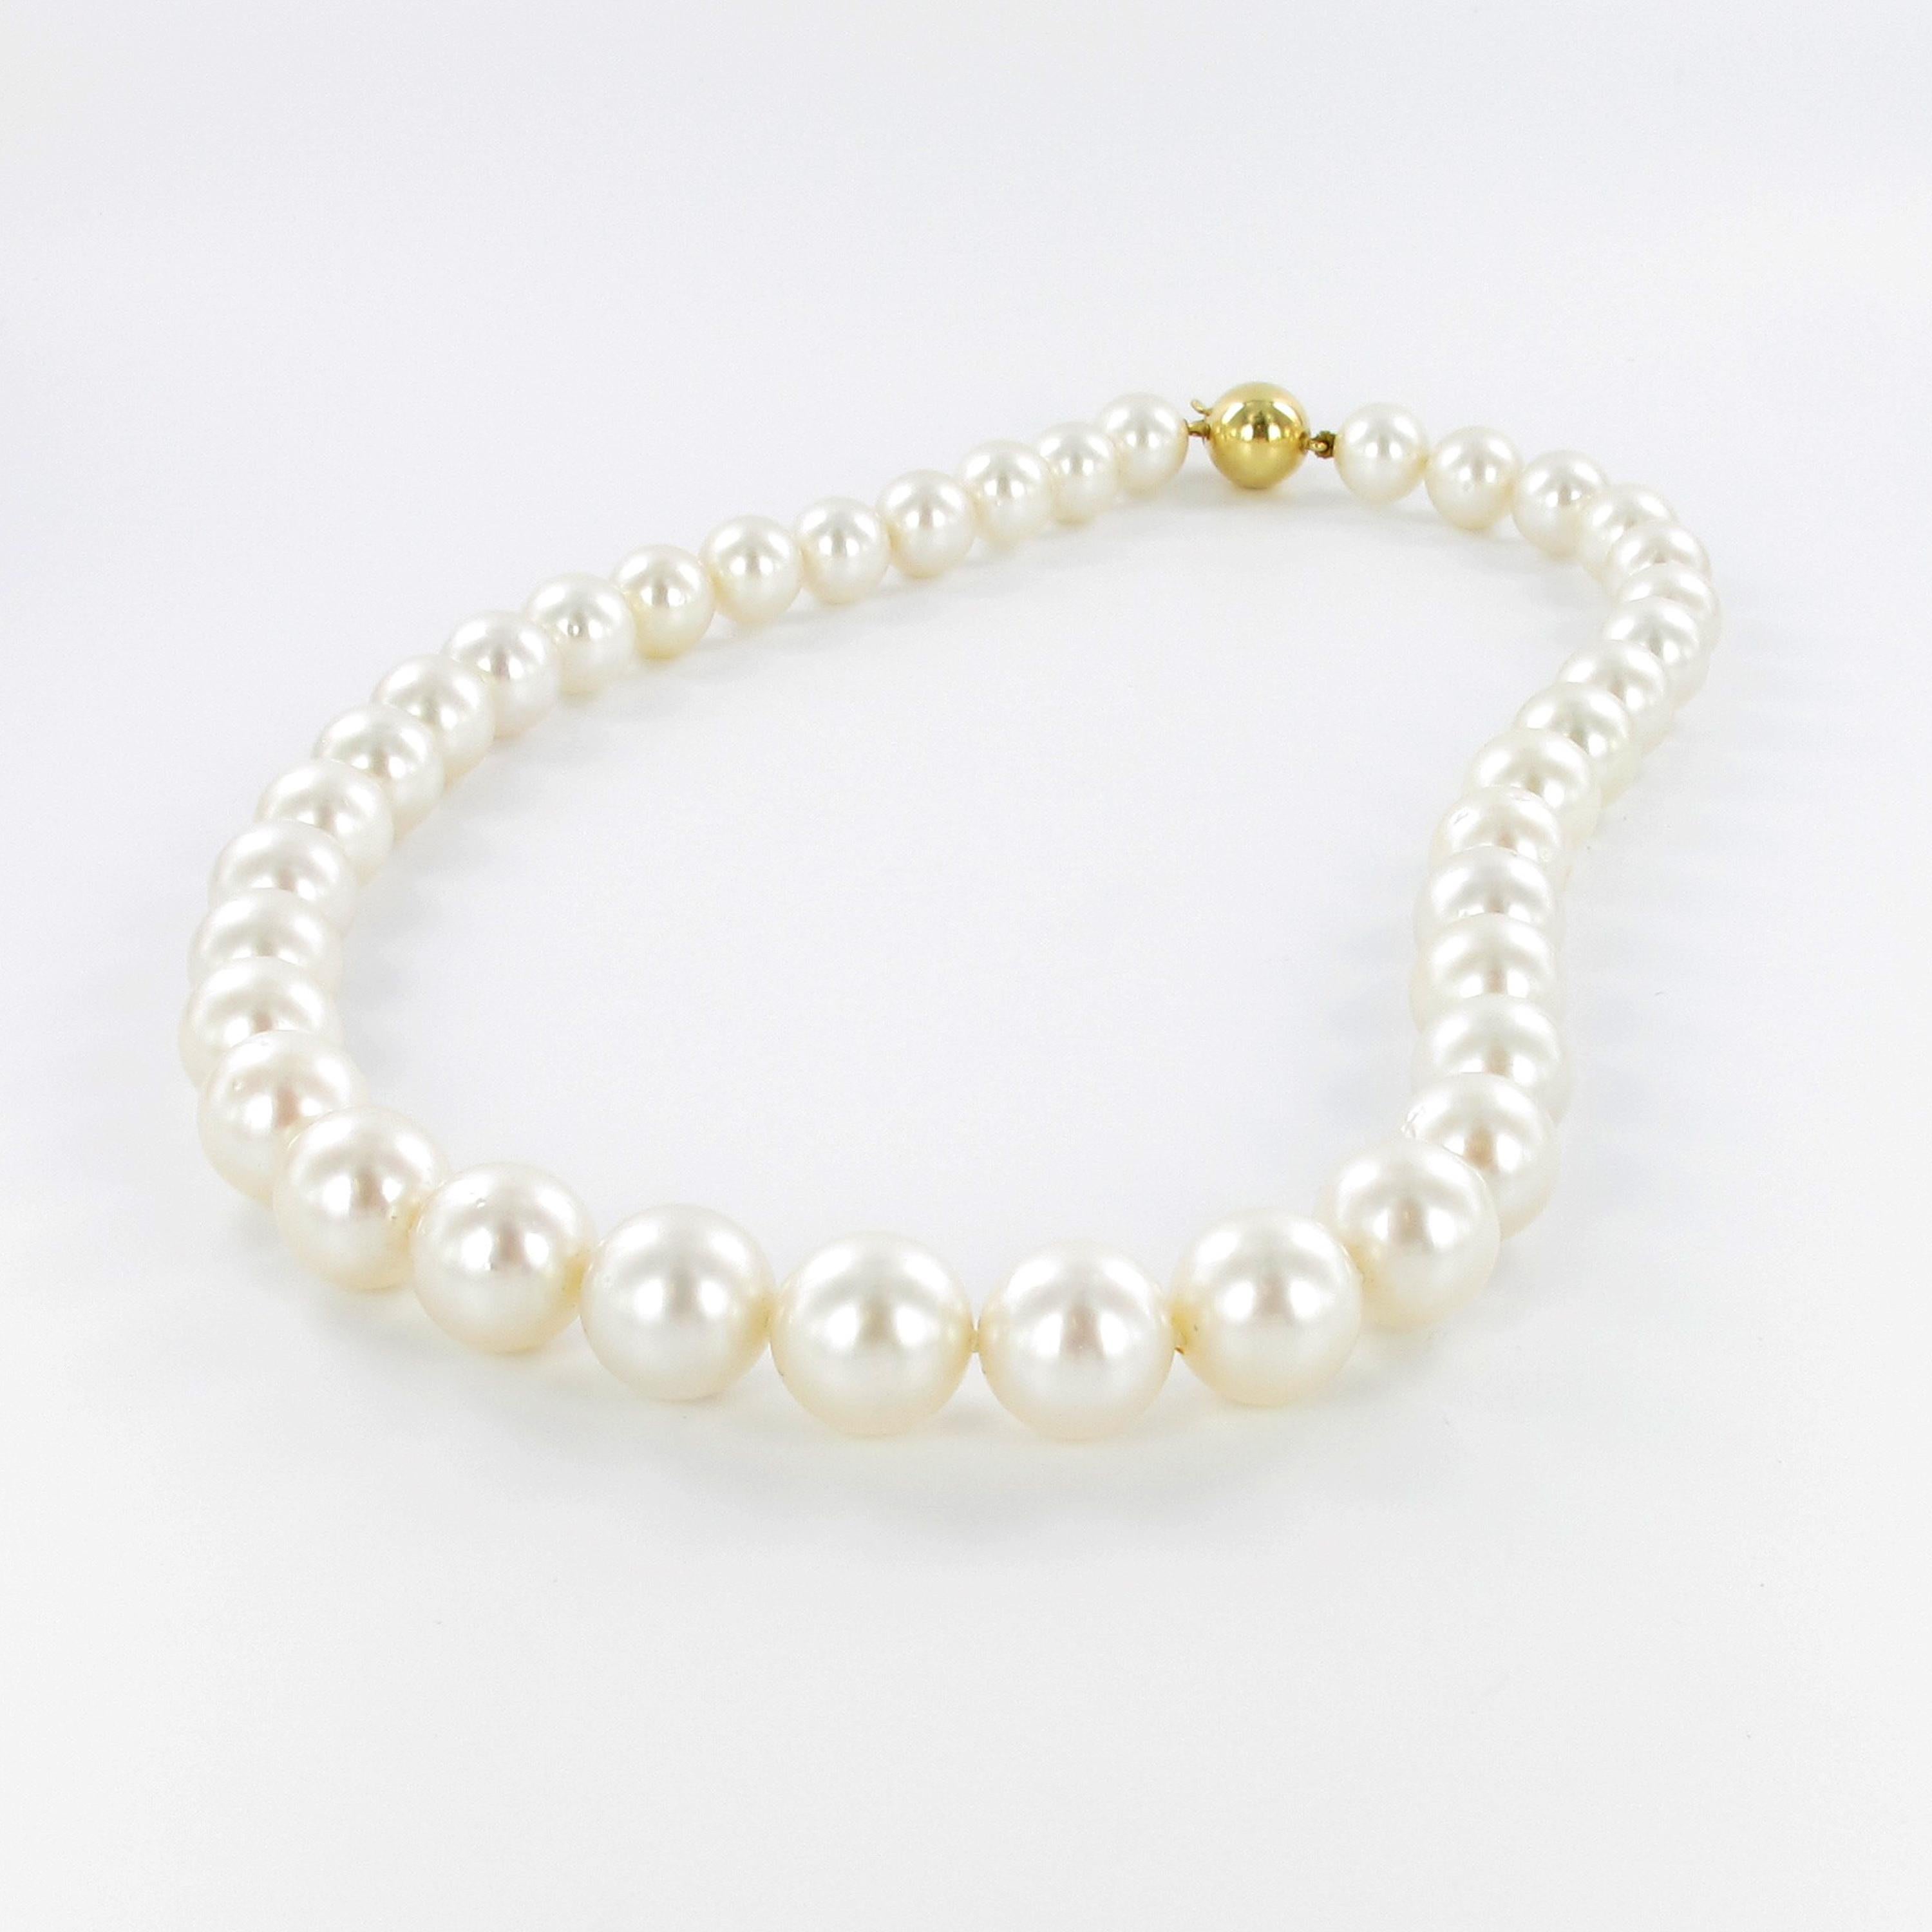 Bead White South Sea Cultured Pearl Necklace